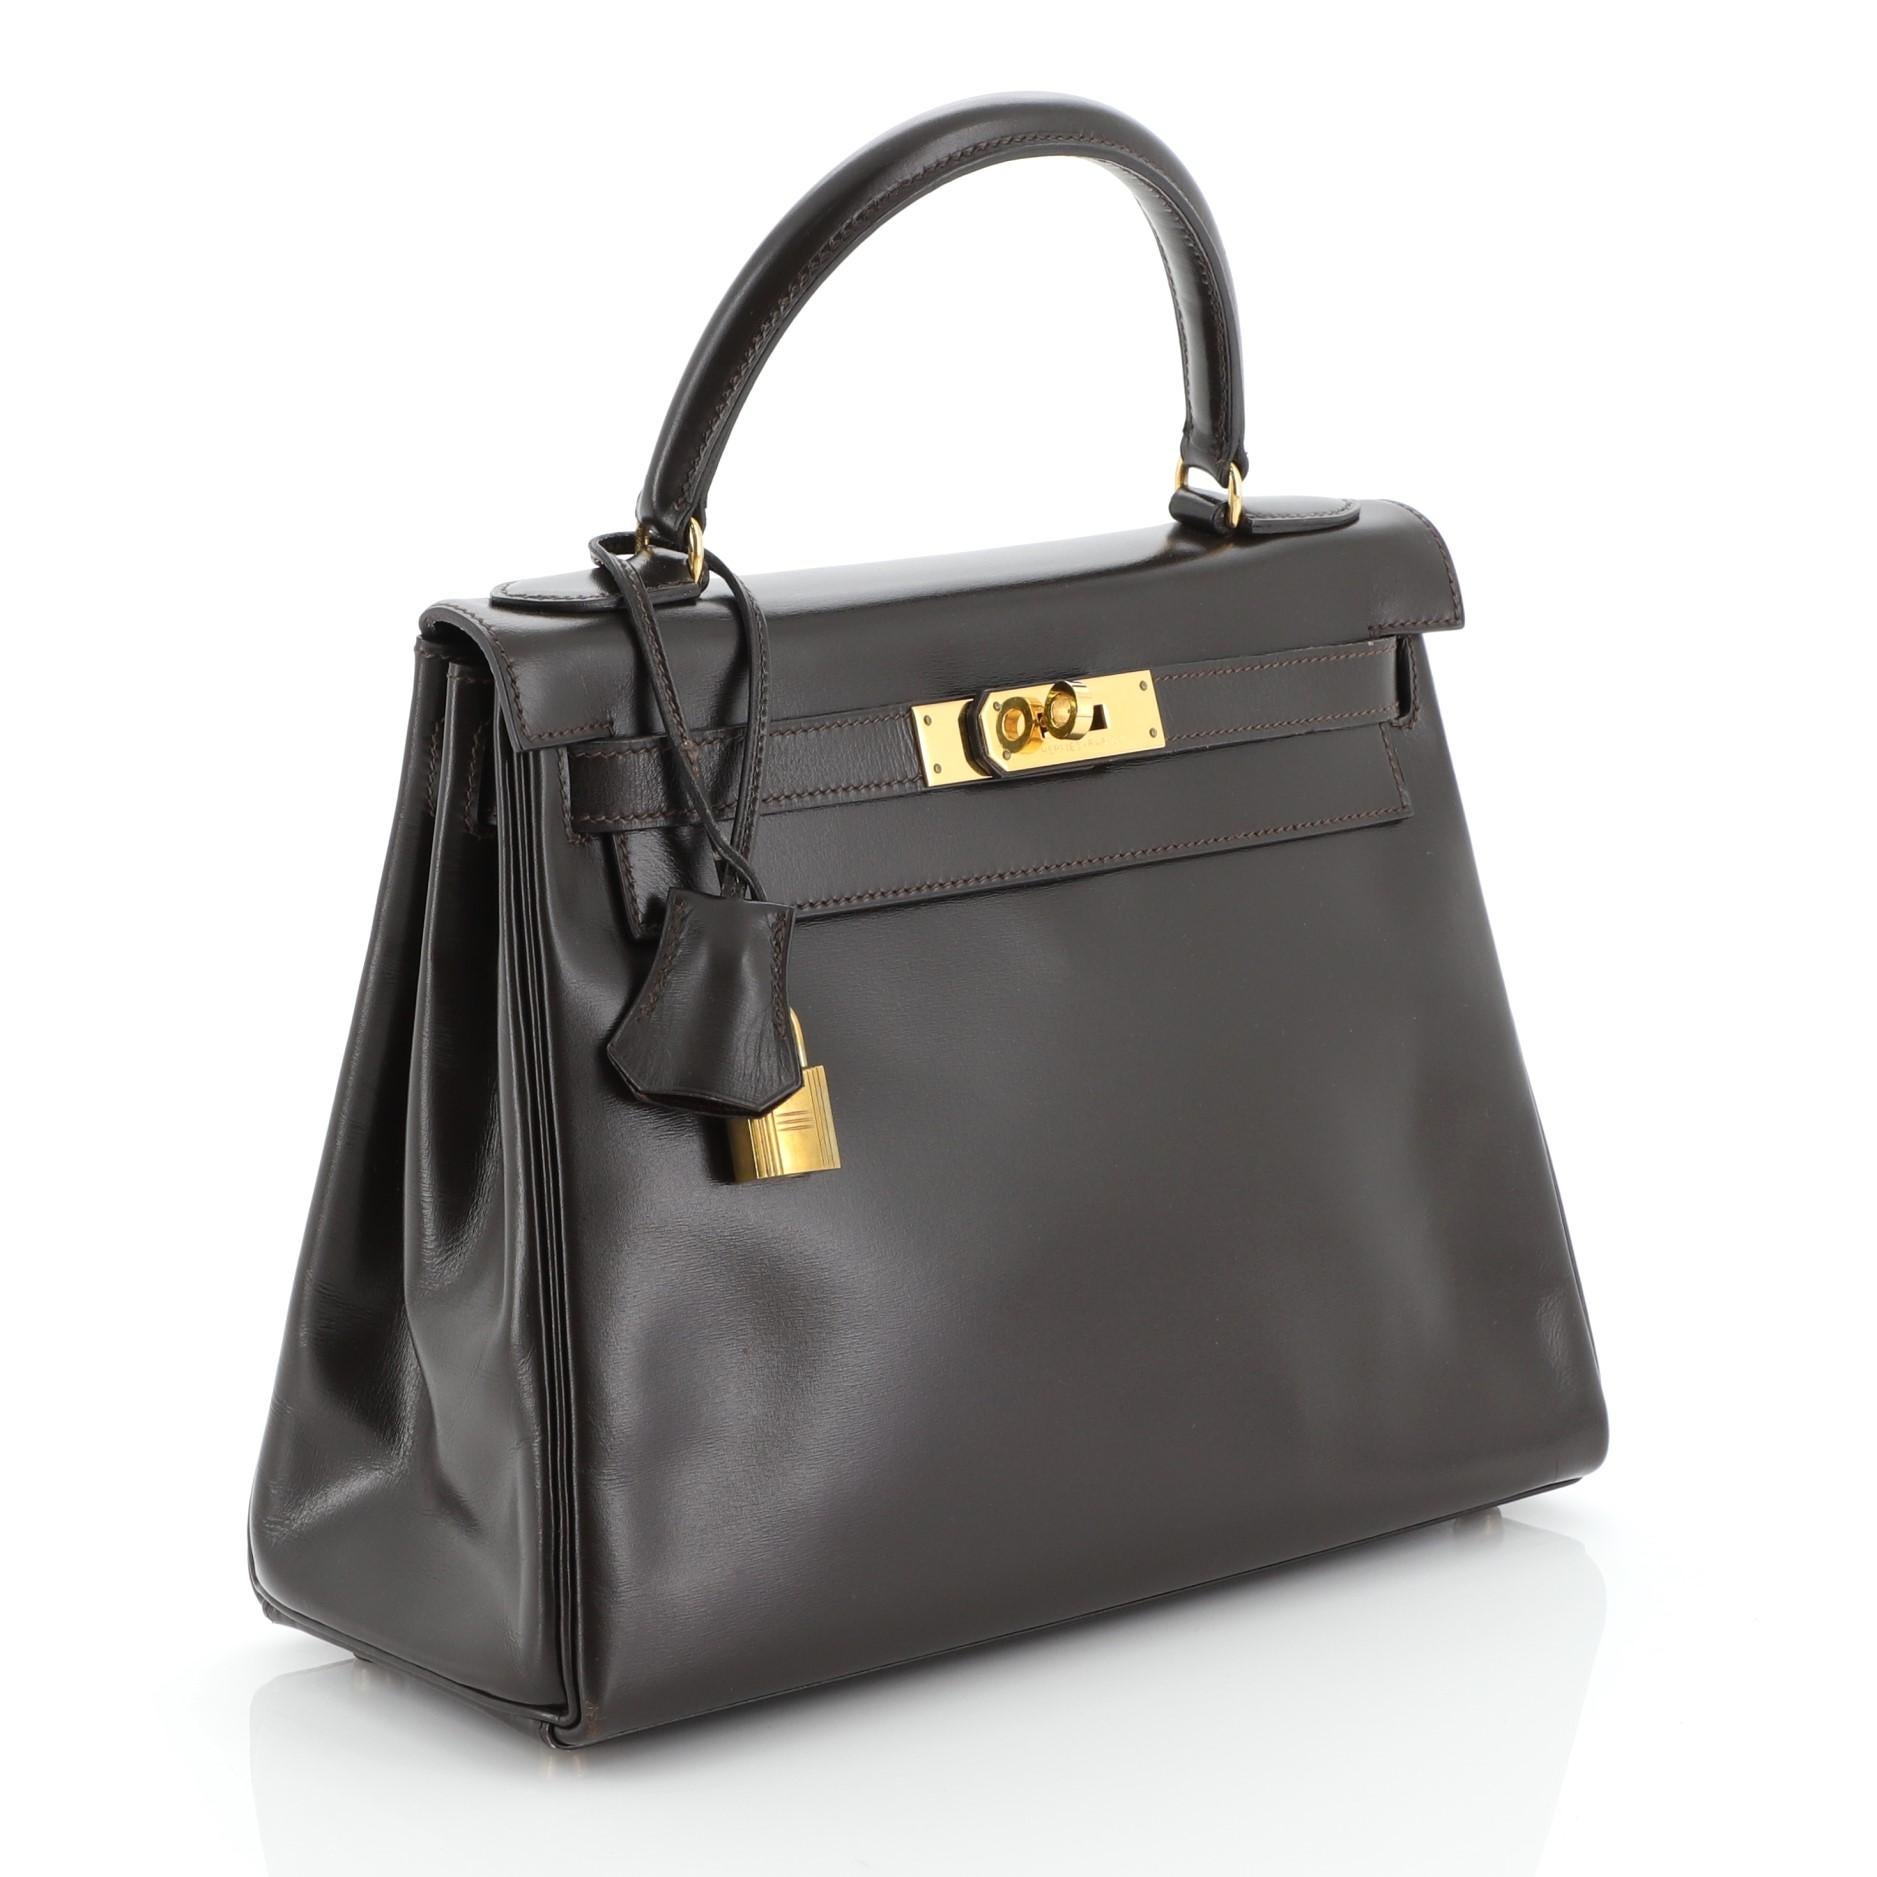 This Hermes Kelly Handbag Ebene Box Calf with Gold Hardware 28, crafted in Ebene brown Box Calf leather, features a single top handle, frontal flap, and gold hardware. Its turn-lock closure opens to an Ebene brown Chevre leather interior with zip